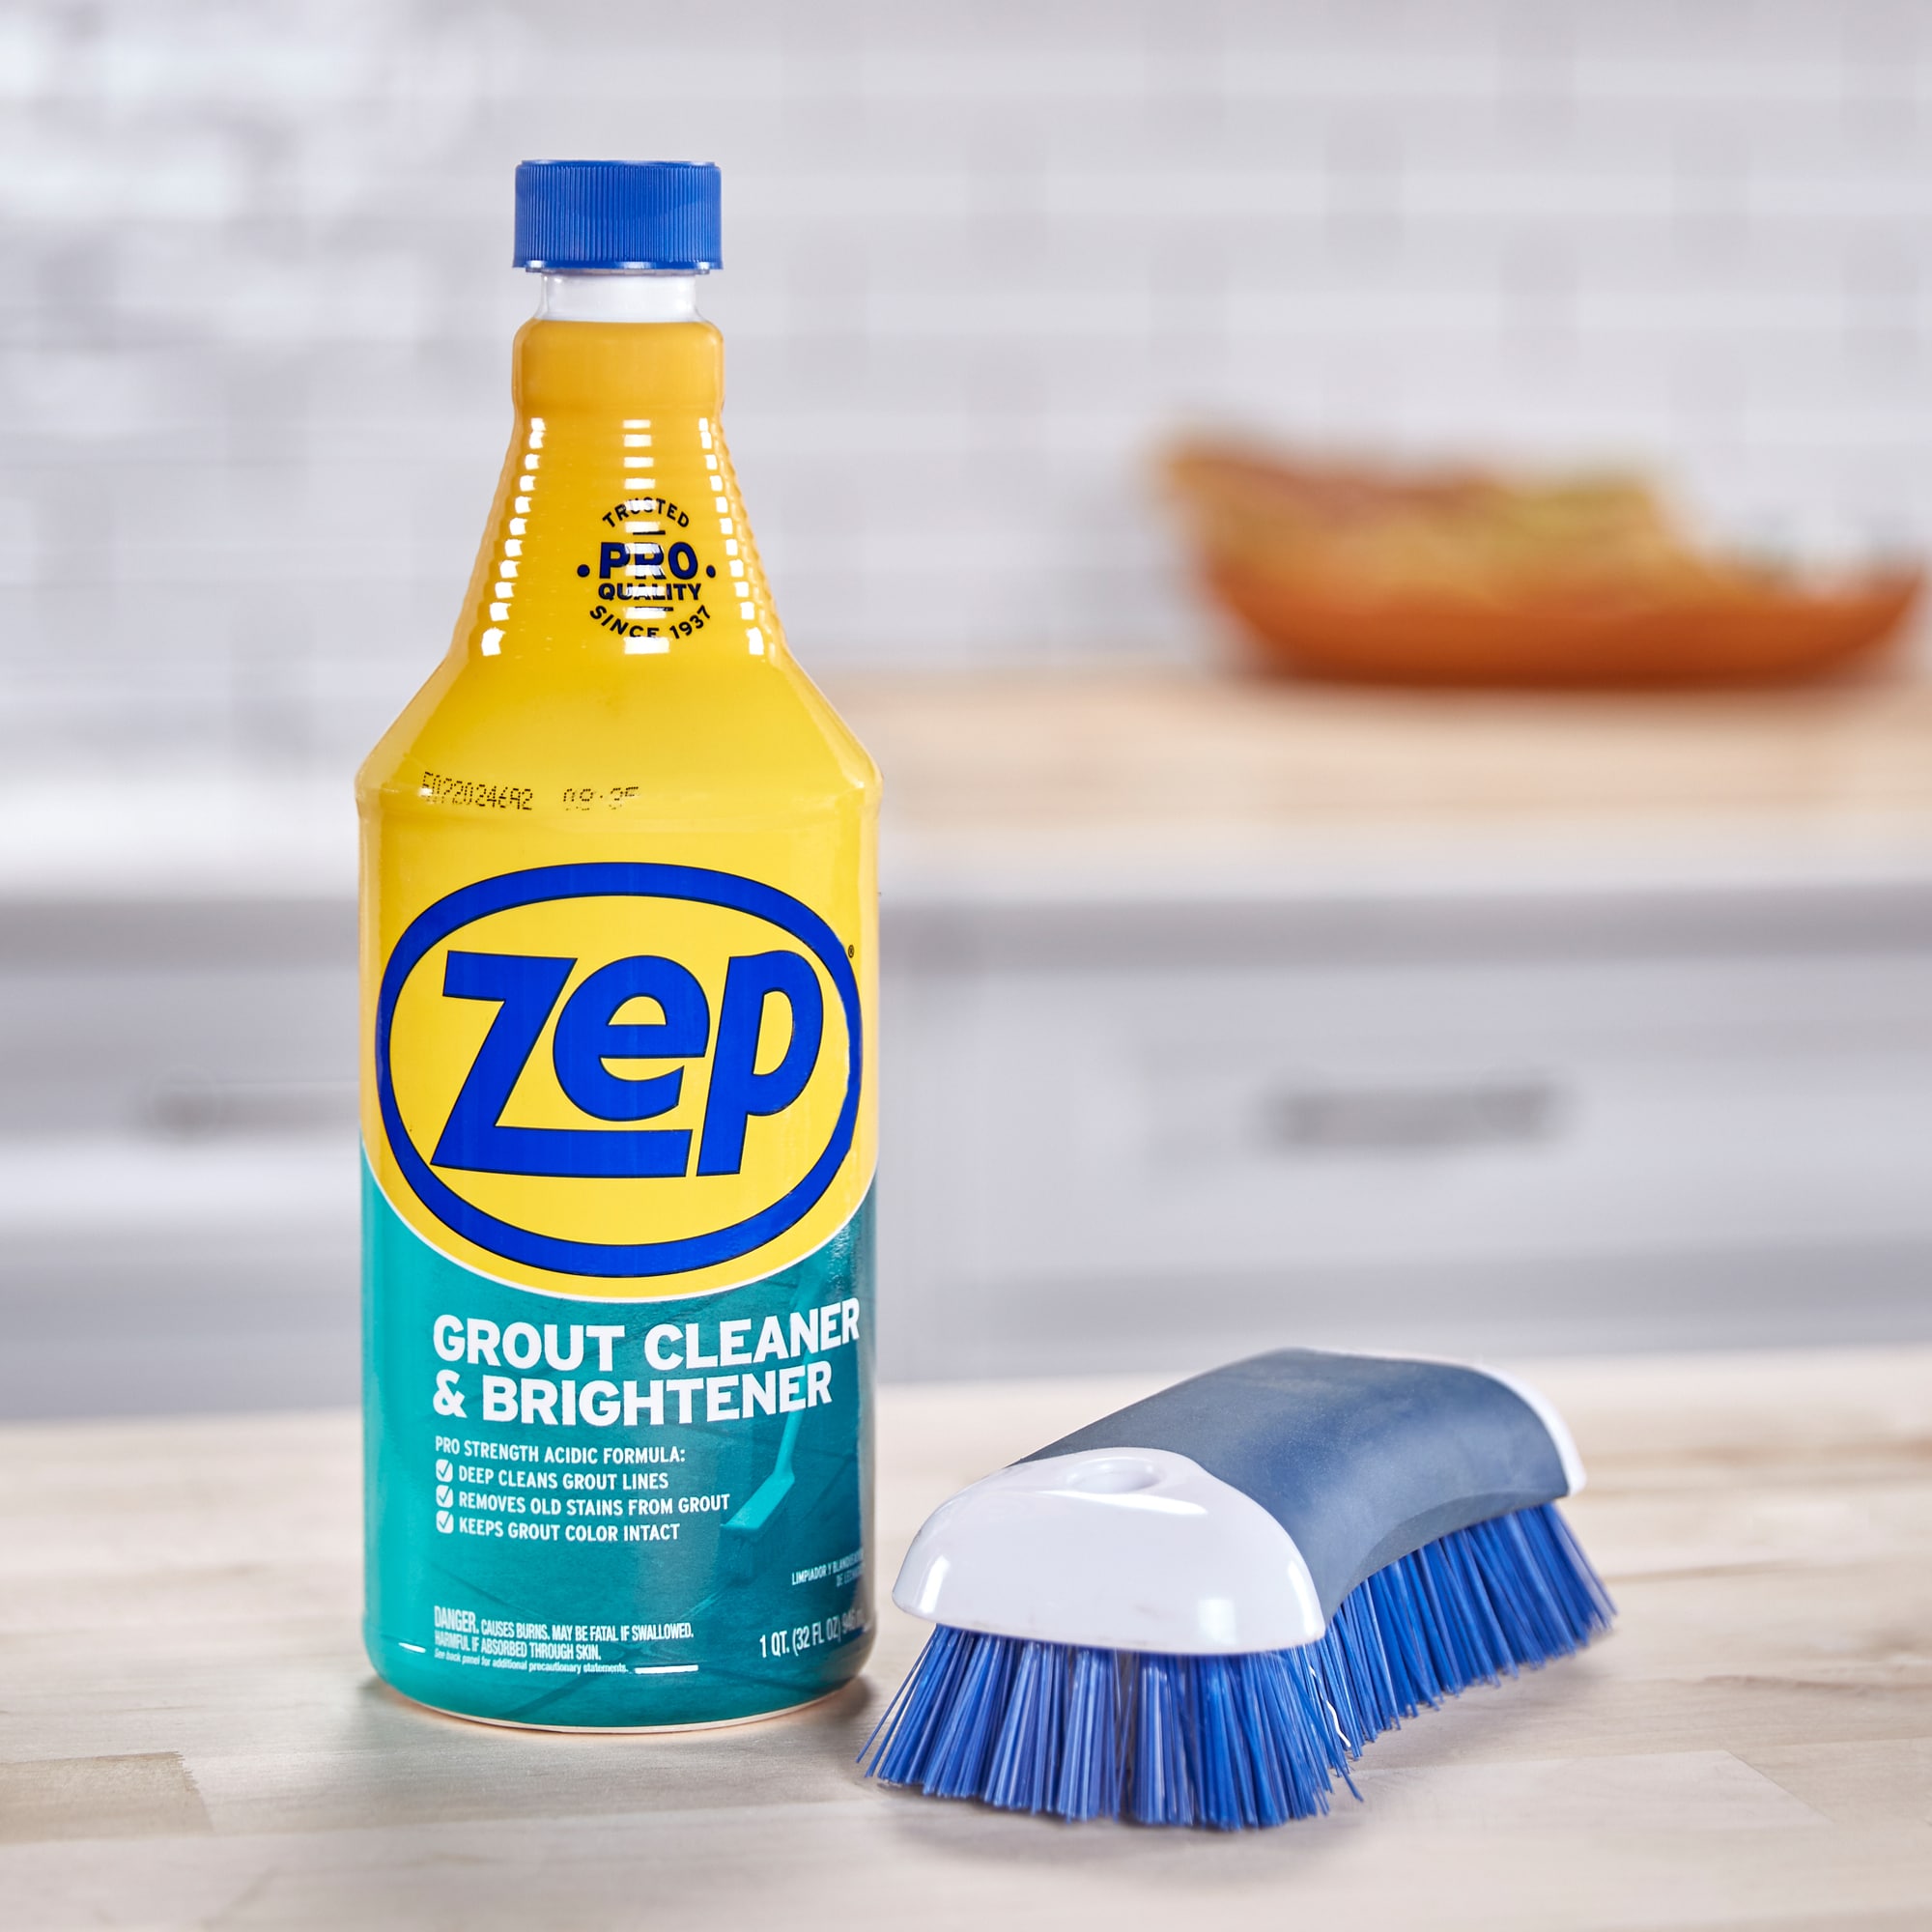 Zep Grout cleaner and brightener 32-oz